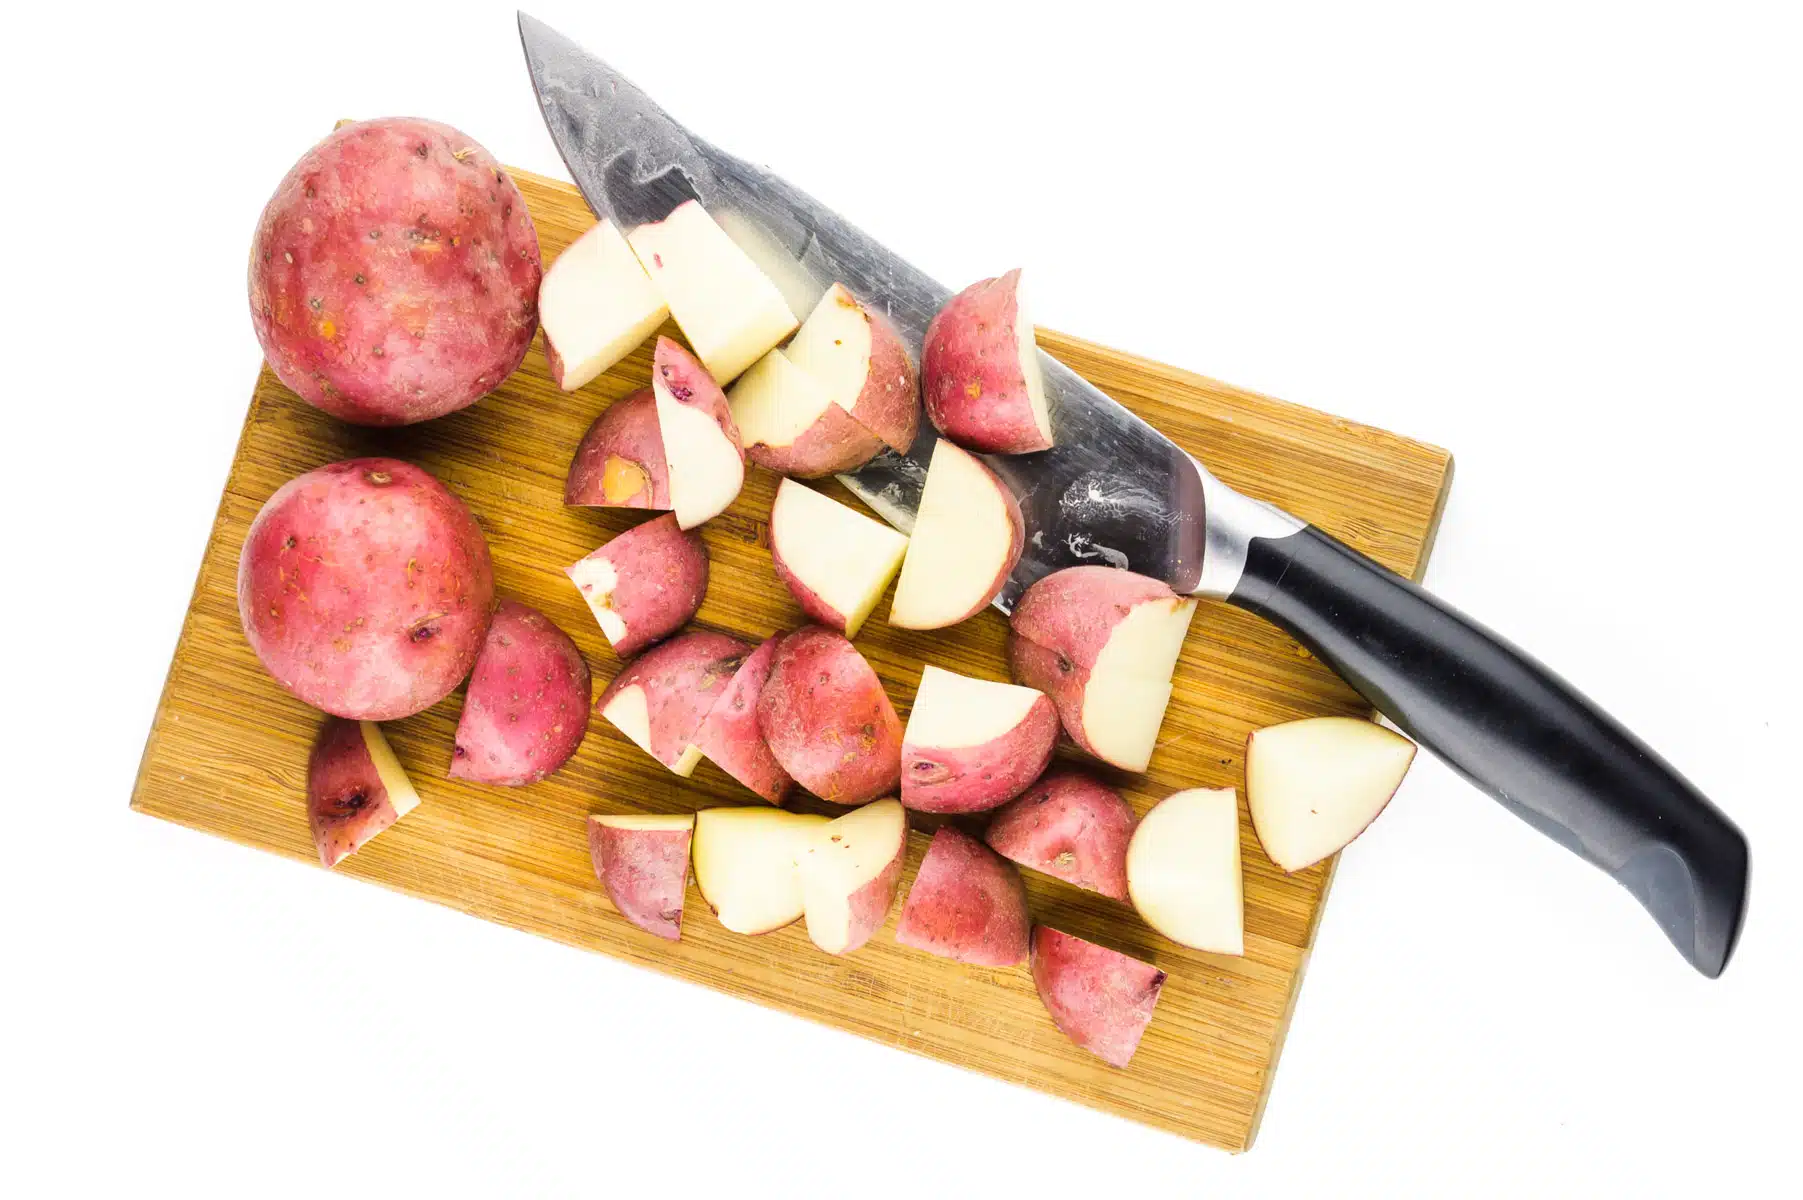 Sliced potatoes sit on a cutting board next to a knife.